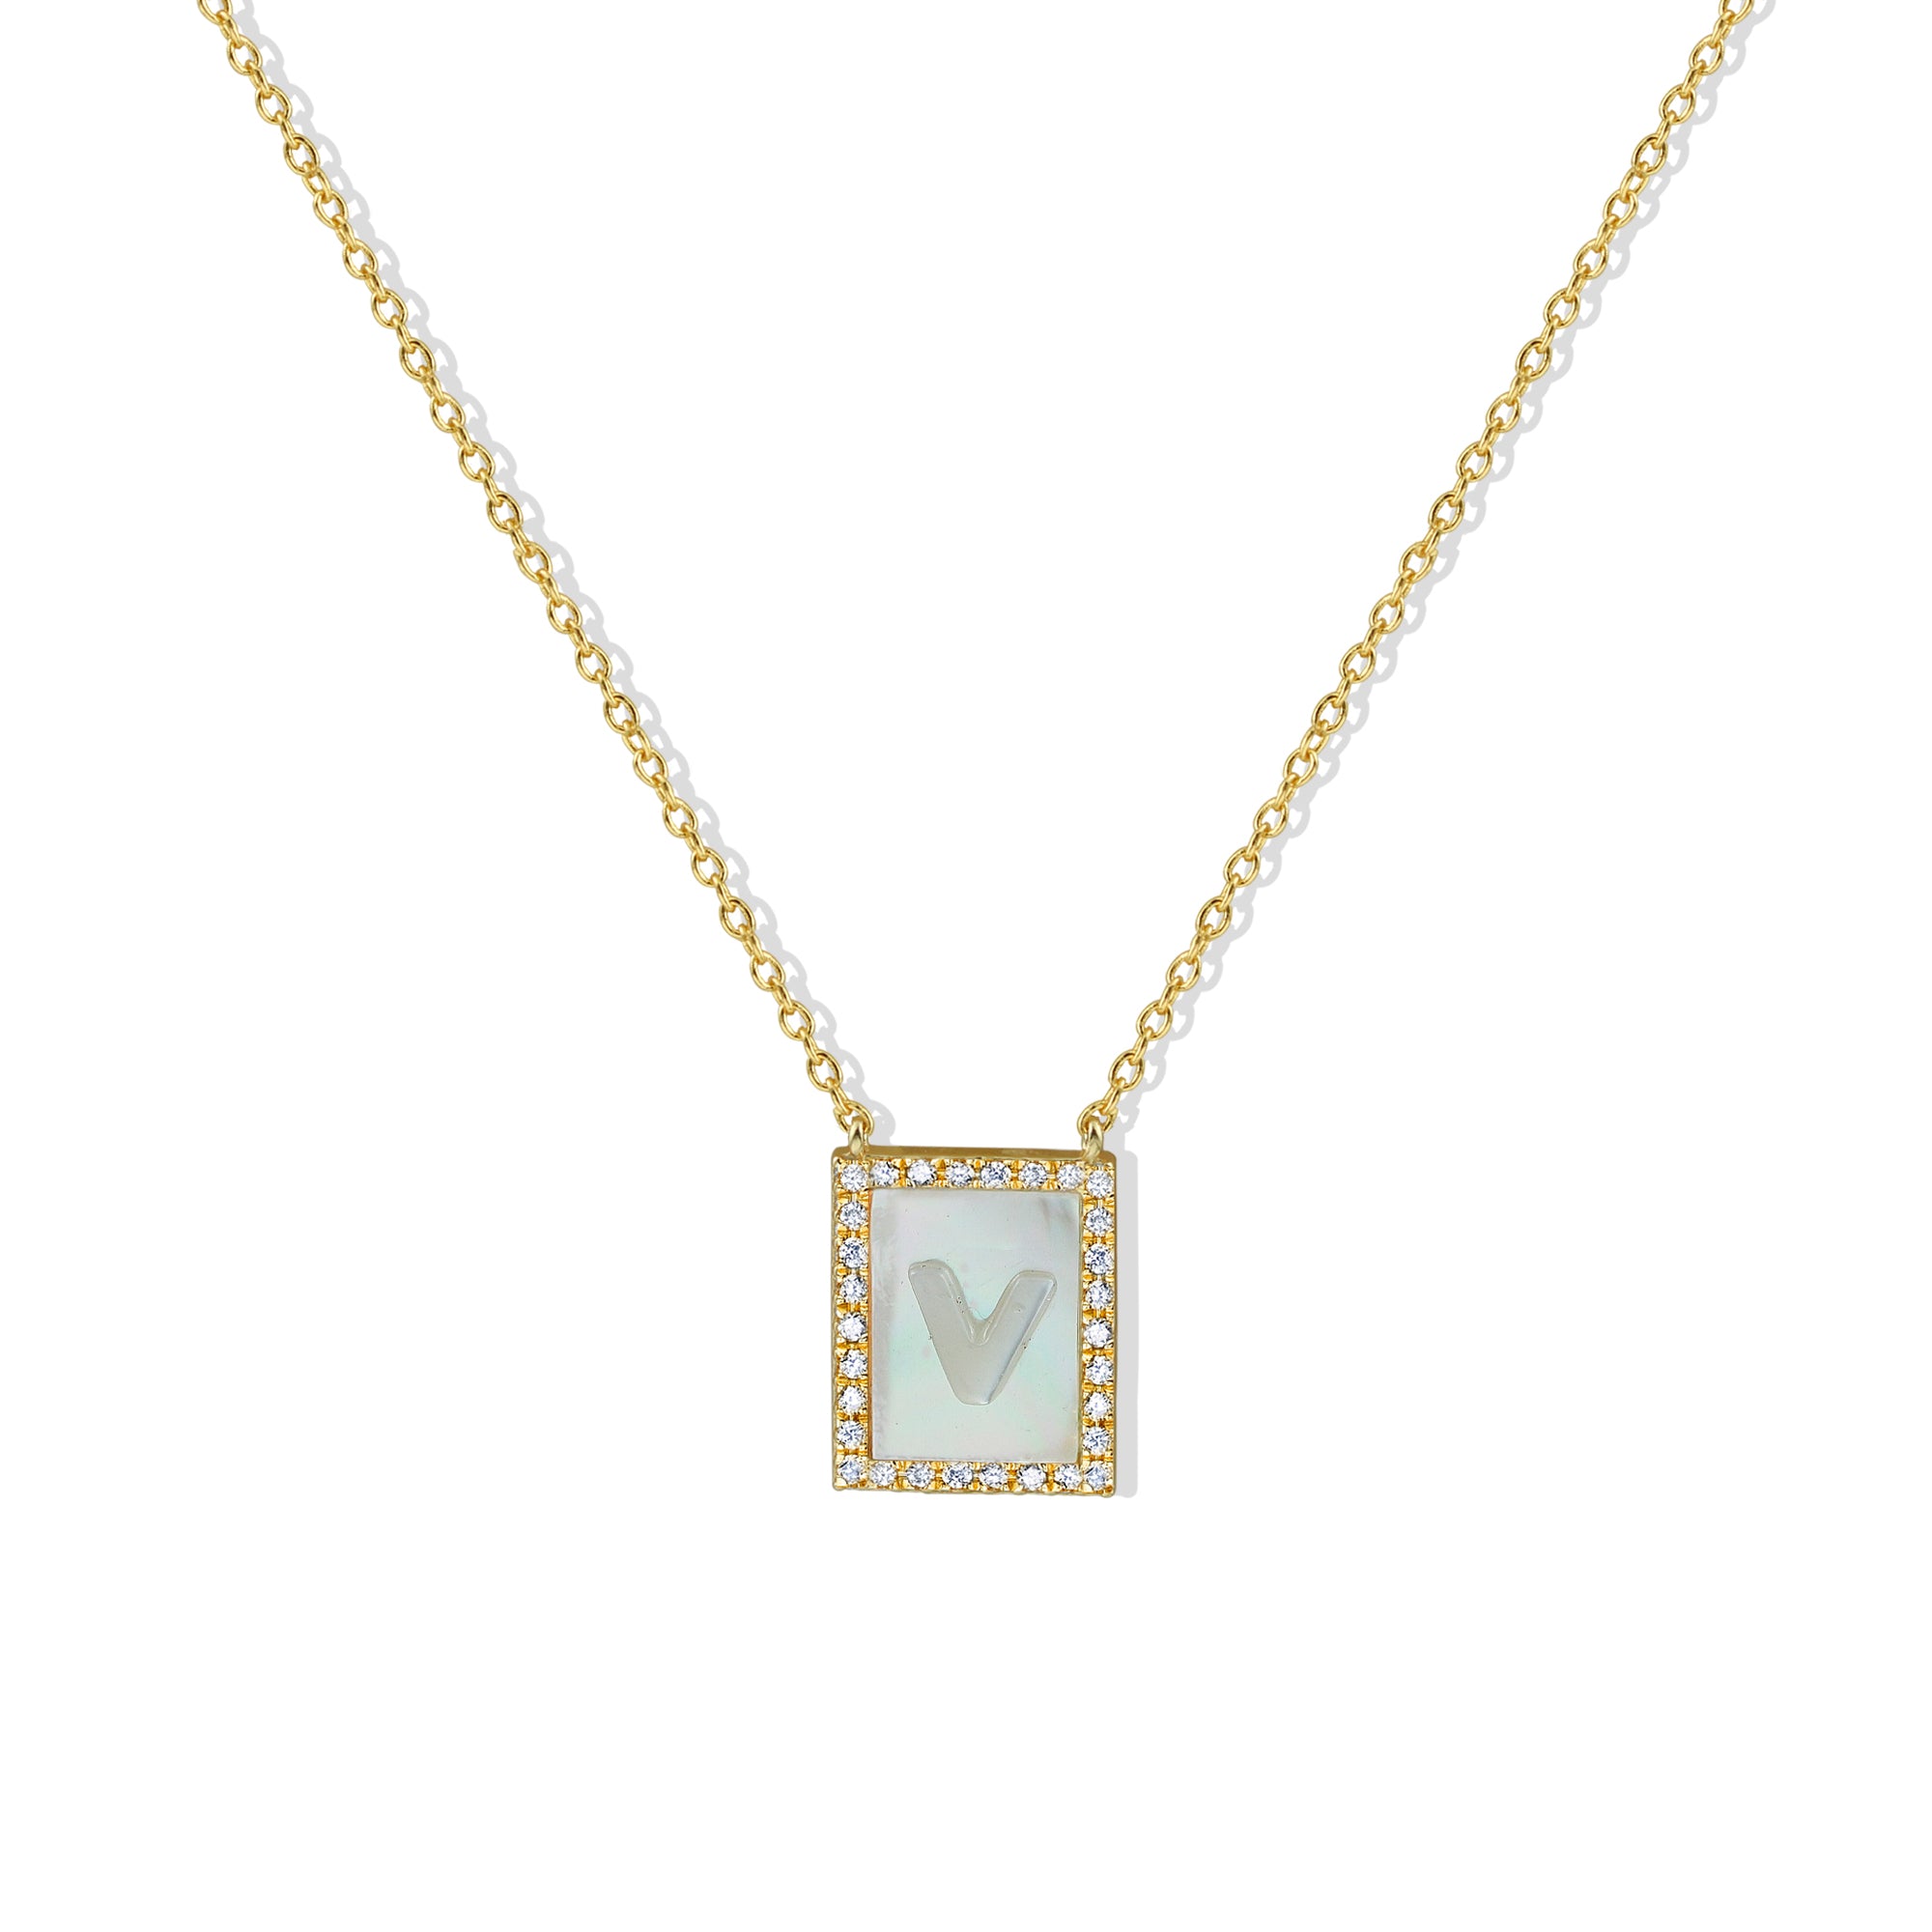 THE MOTHER OF PEARL INITIAL PENDANT